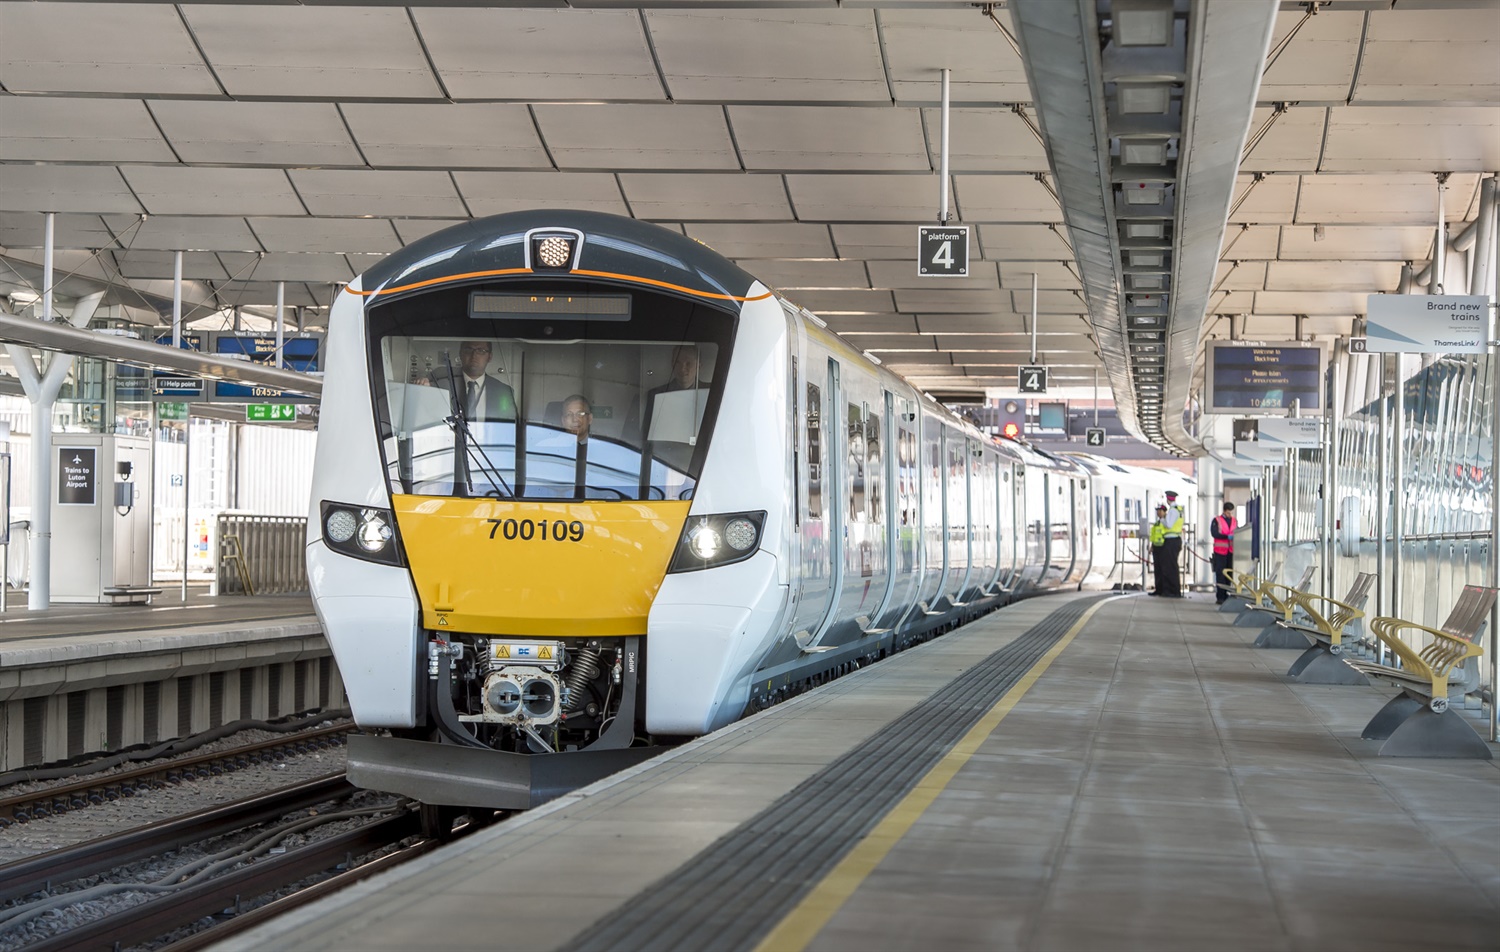 UK's first-ever self-drive mainline train runs on Thameslink route